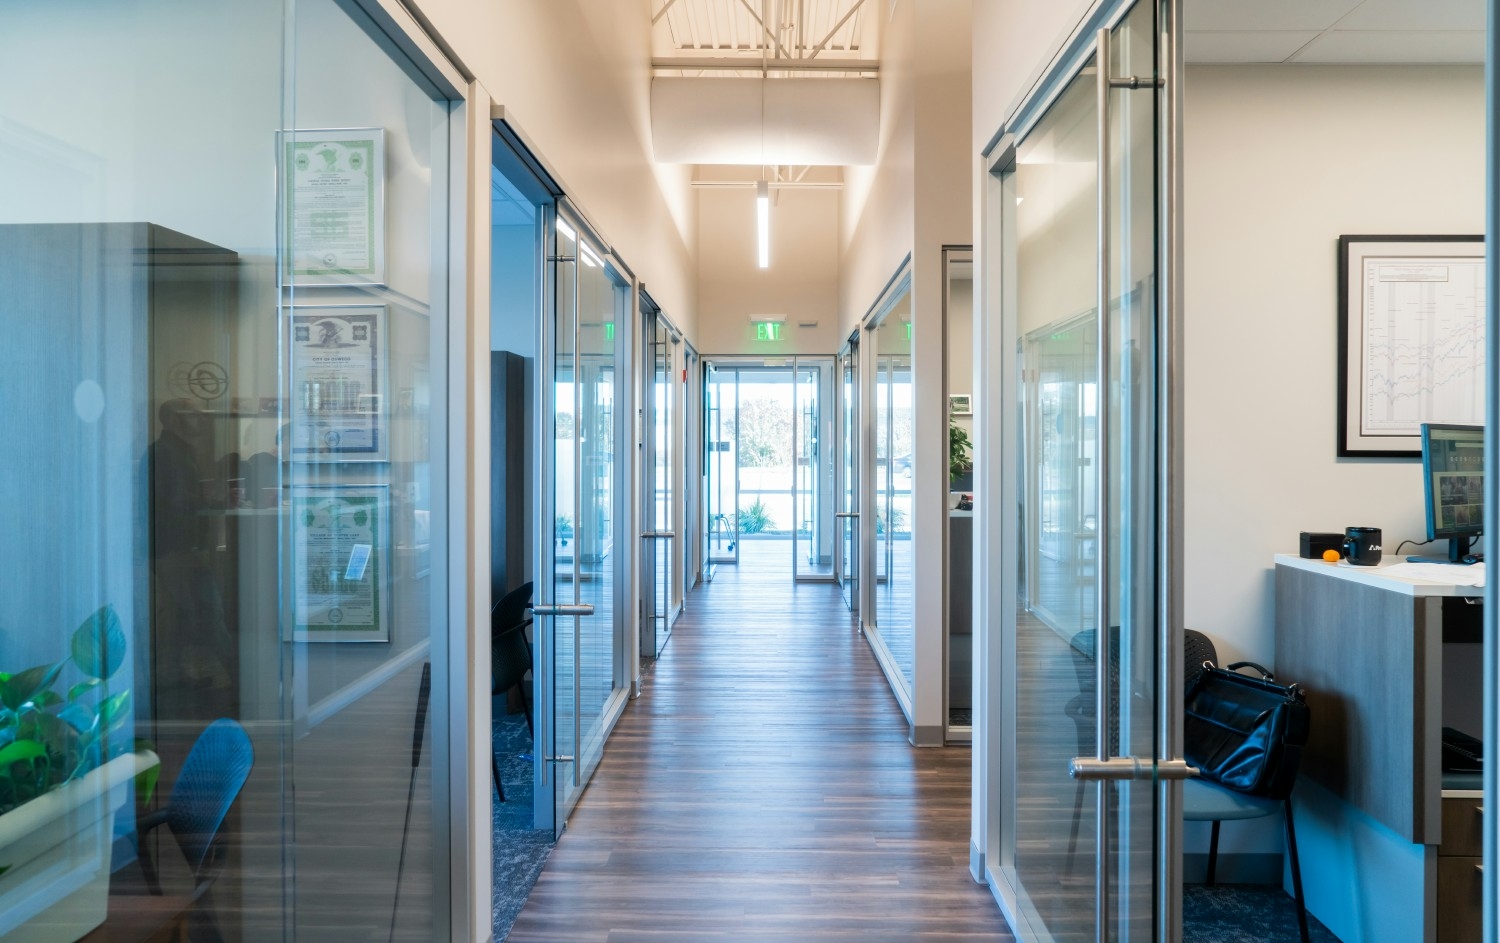 Looking down the hallway of our new office space - open spaces, natural light and modern finishes.